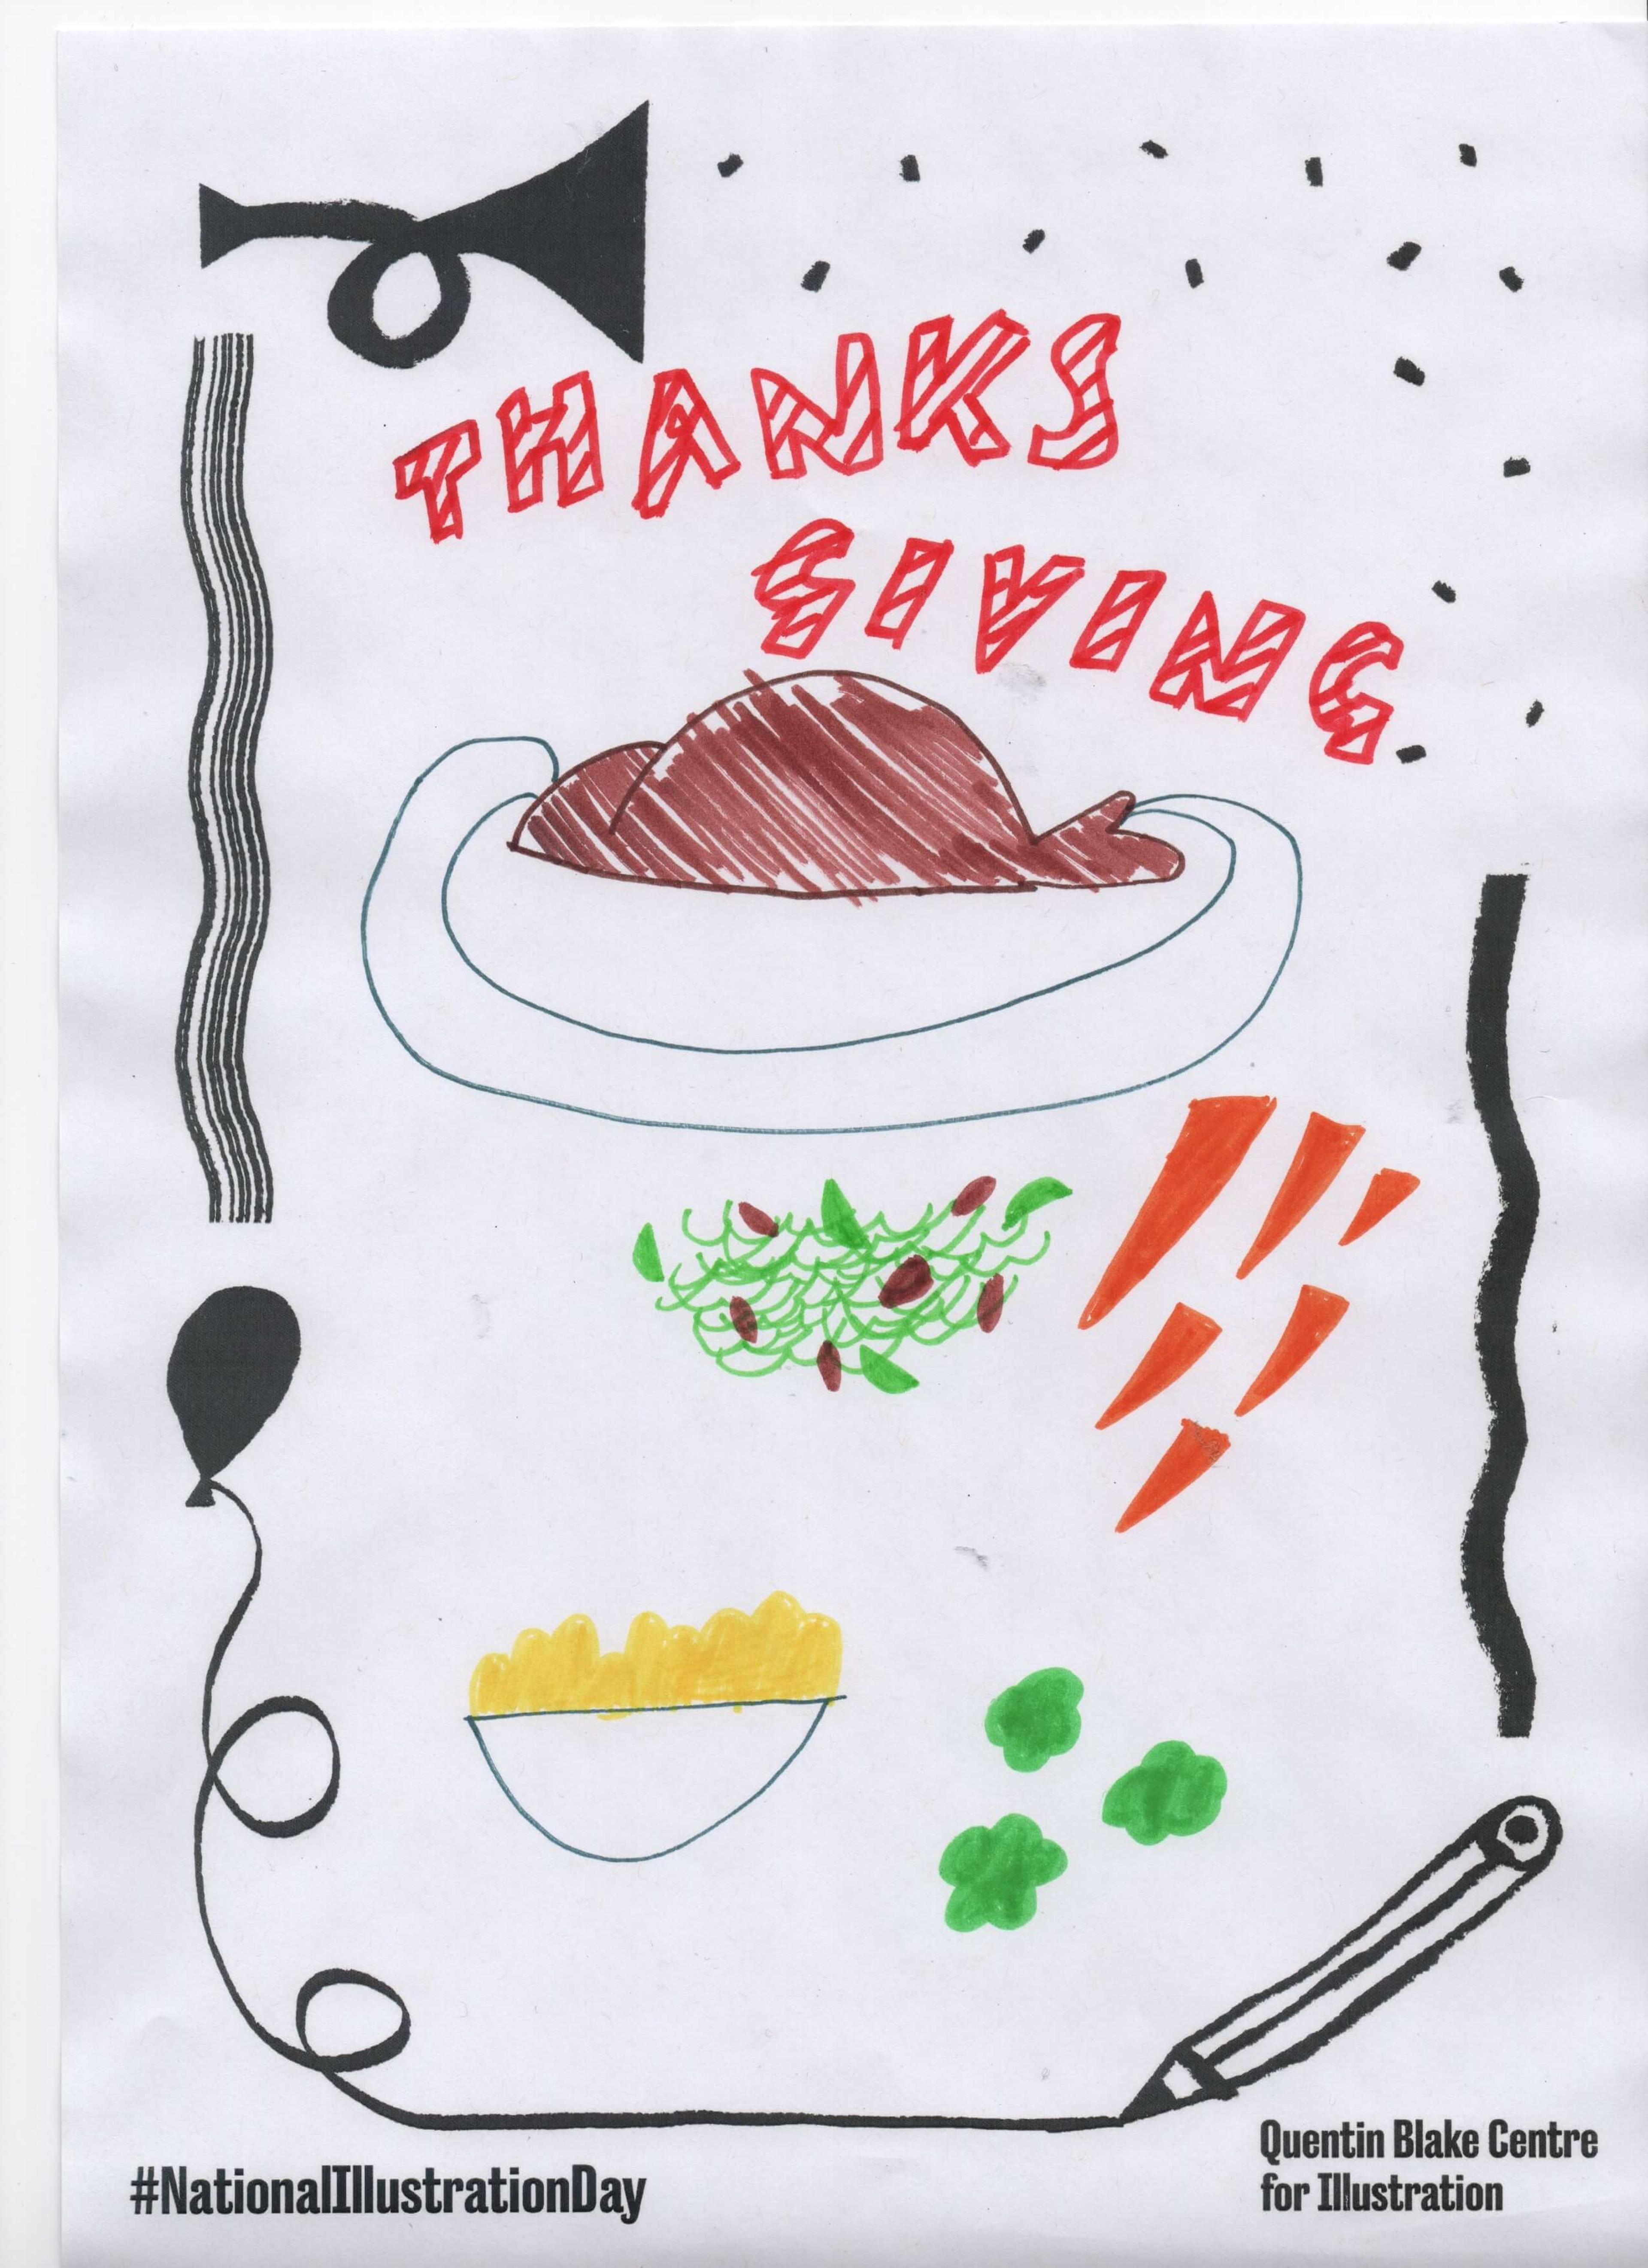 Drawing of a turkey, brussels sprouts and a bowl of sweet potatoes with the word "Thanksgiving" written in red bubble text.